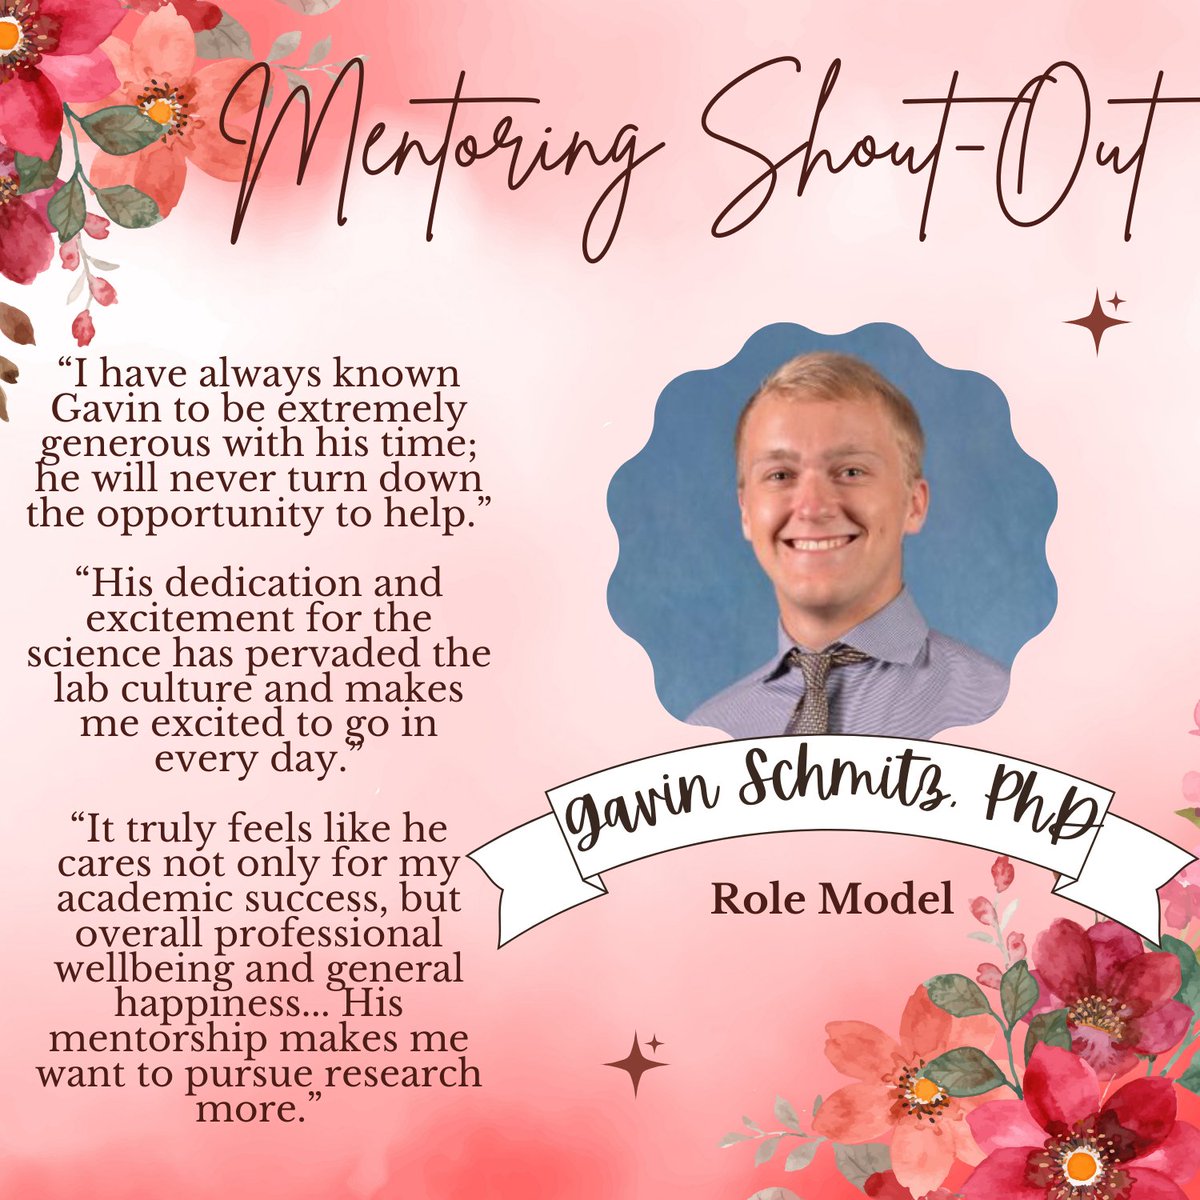 @gavinpschmitz is our next mentoring shout-out recipient. Dr. Schmitz is a @UNCmdphd student who recently completed his PhD in the @UNC_PHCO program, and he exemplifies qualities of a thoughtful and attentive role model.